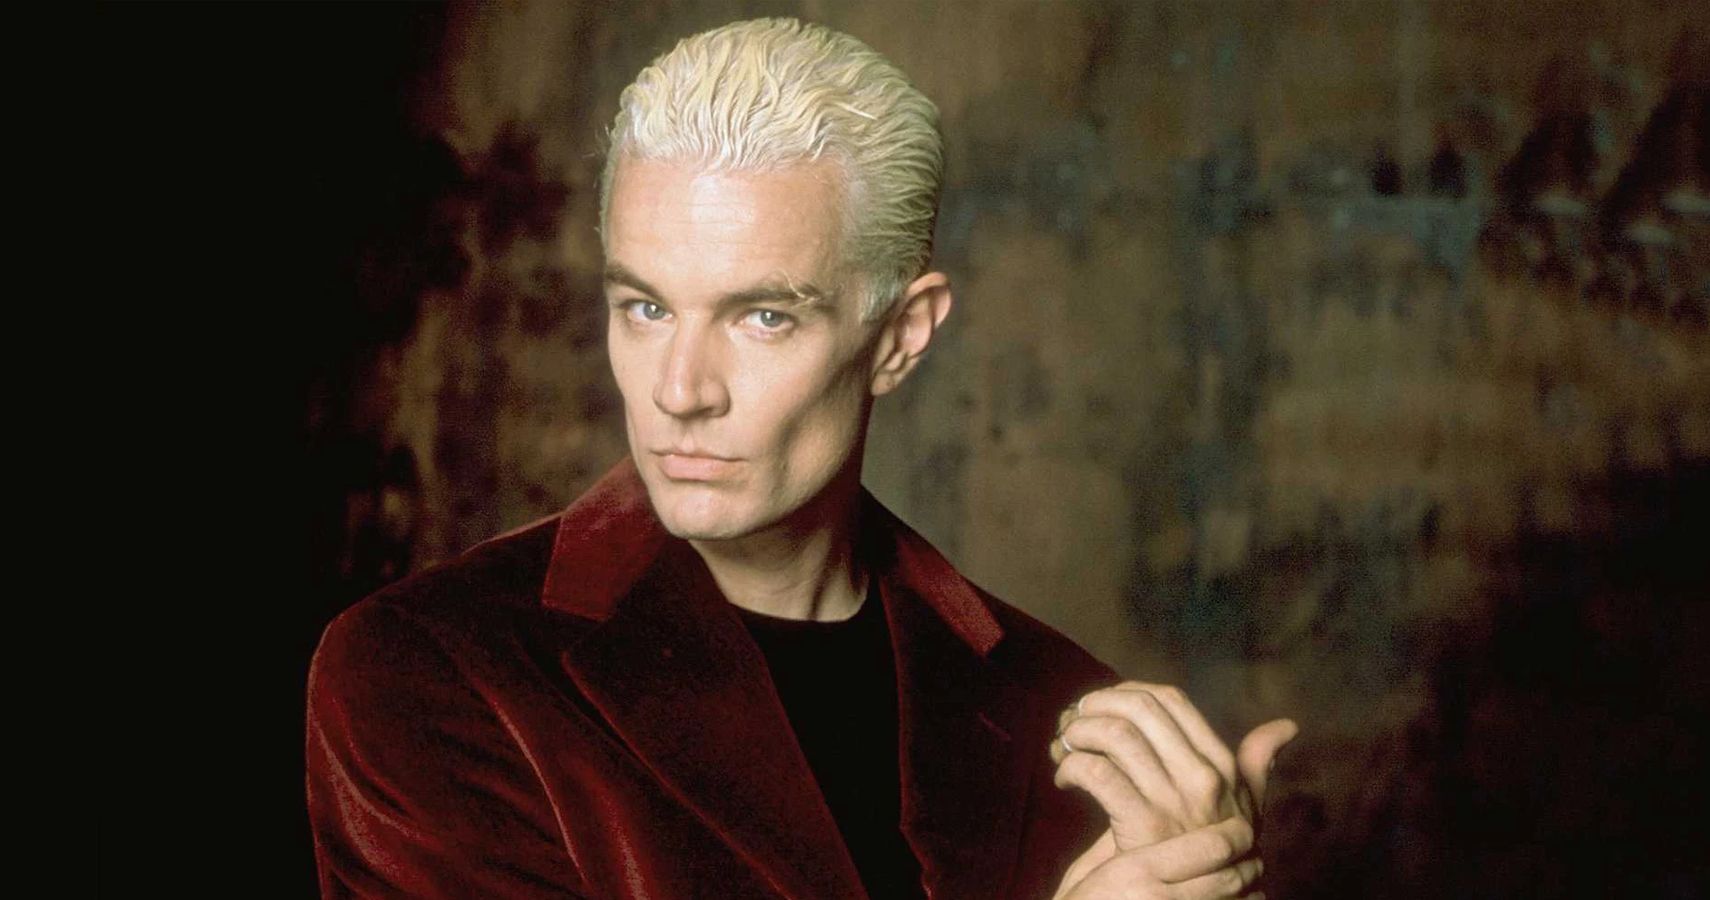 Spike from Buffy the Vampire SLayer